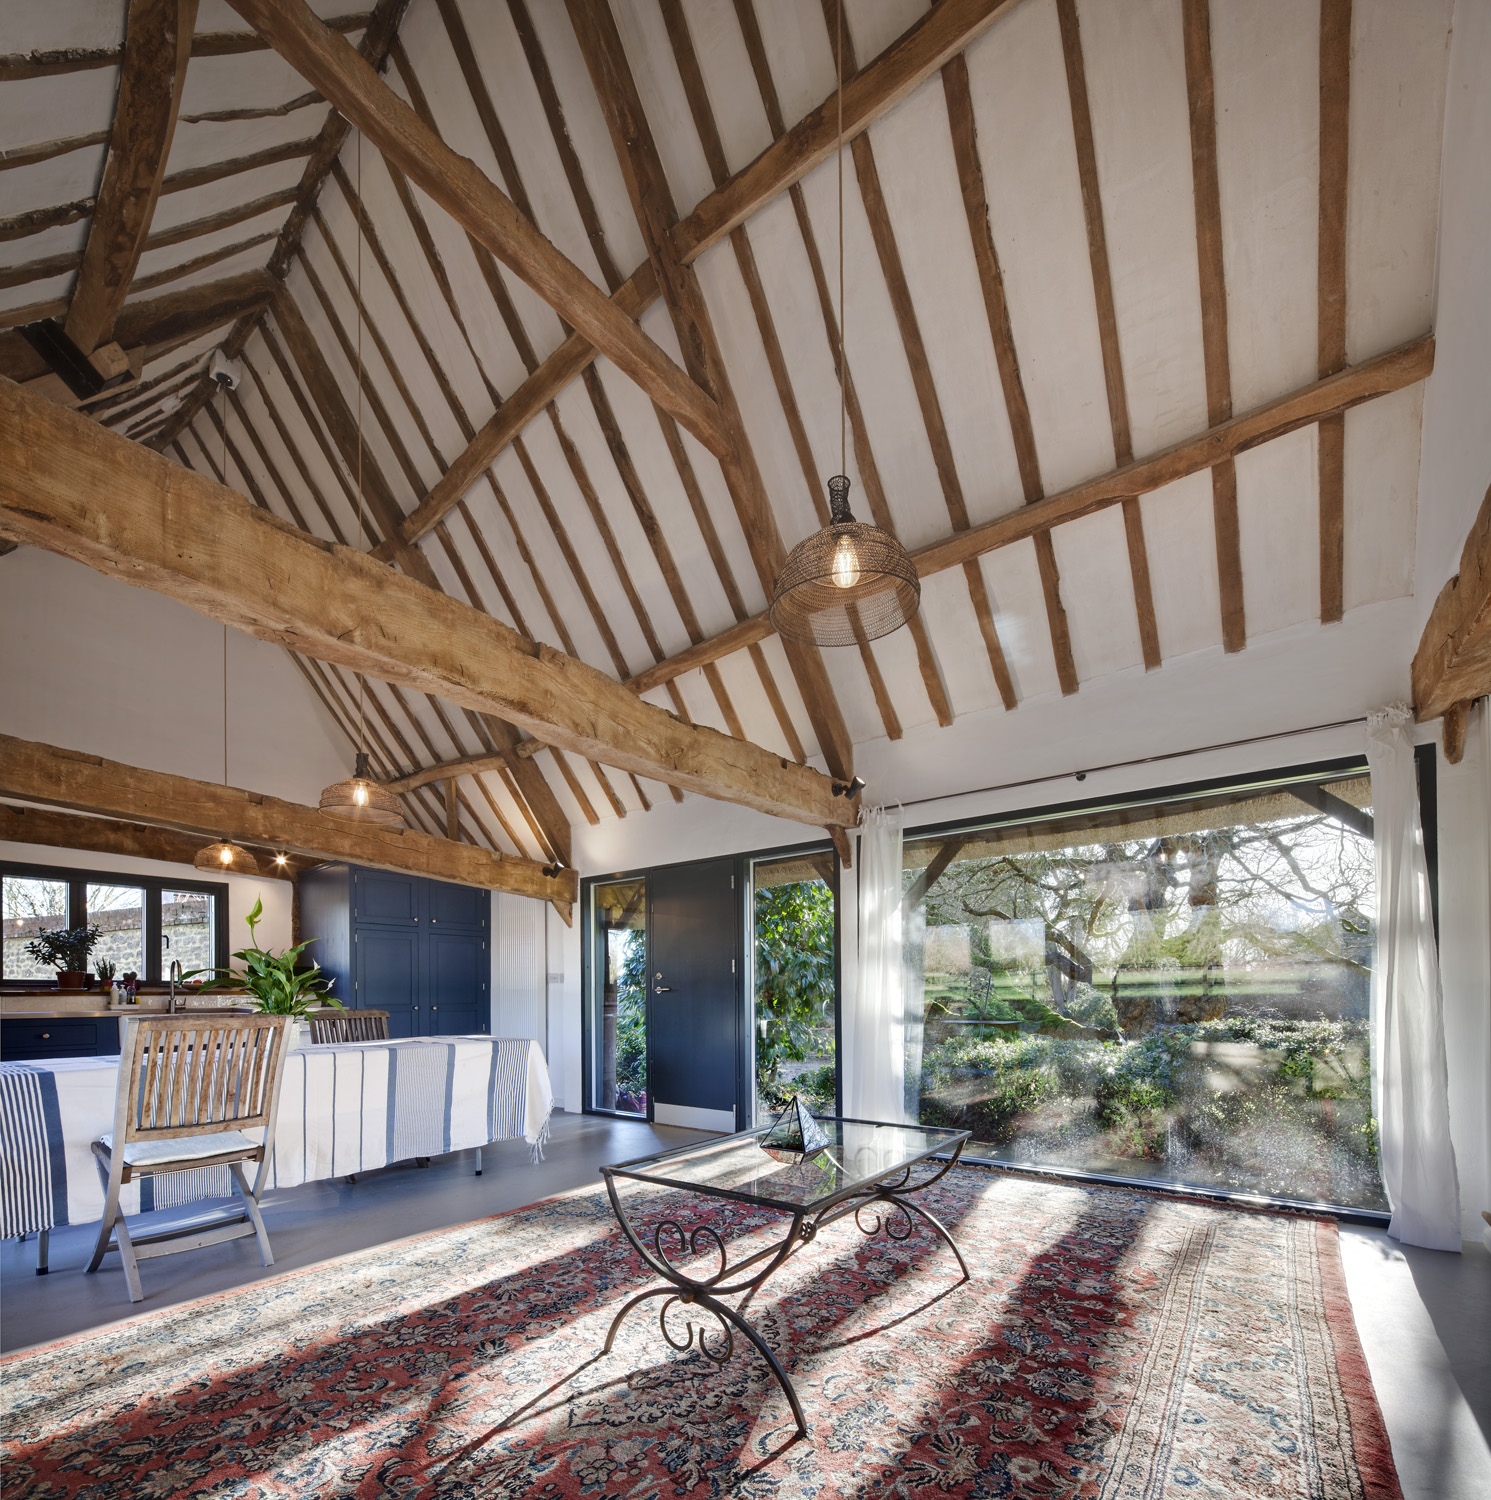  The new extension and barn conversion at Manor Farm, Boars Hill, Oxford, by Transition by Design. 